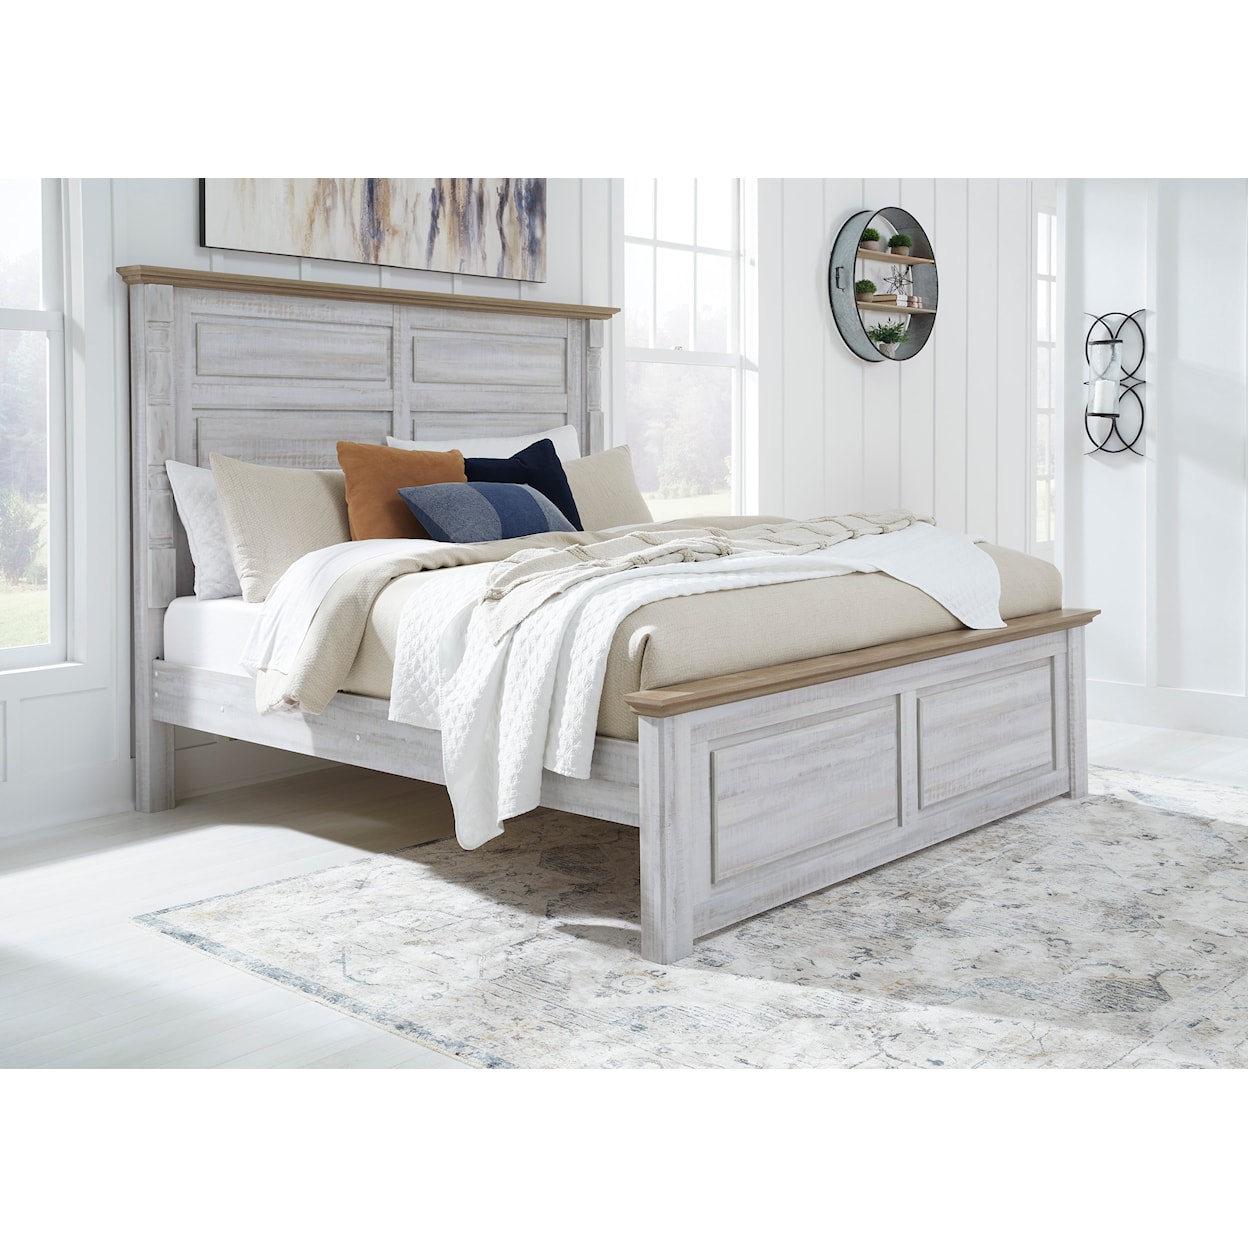 Signature Design by Ashley Haven Bay King Panel Bed